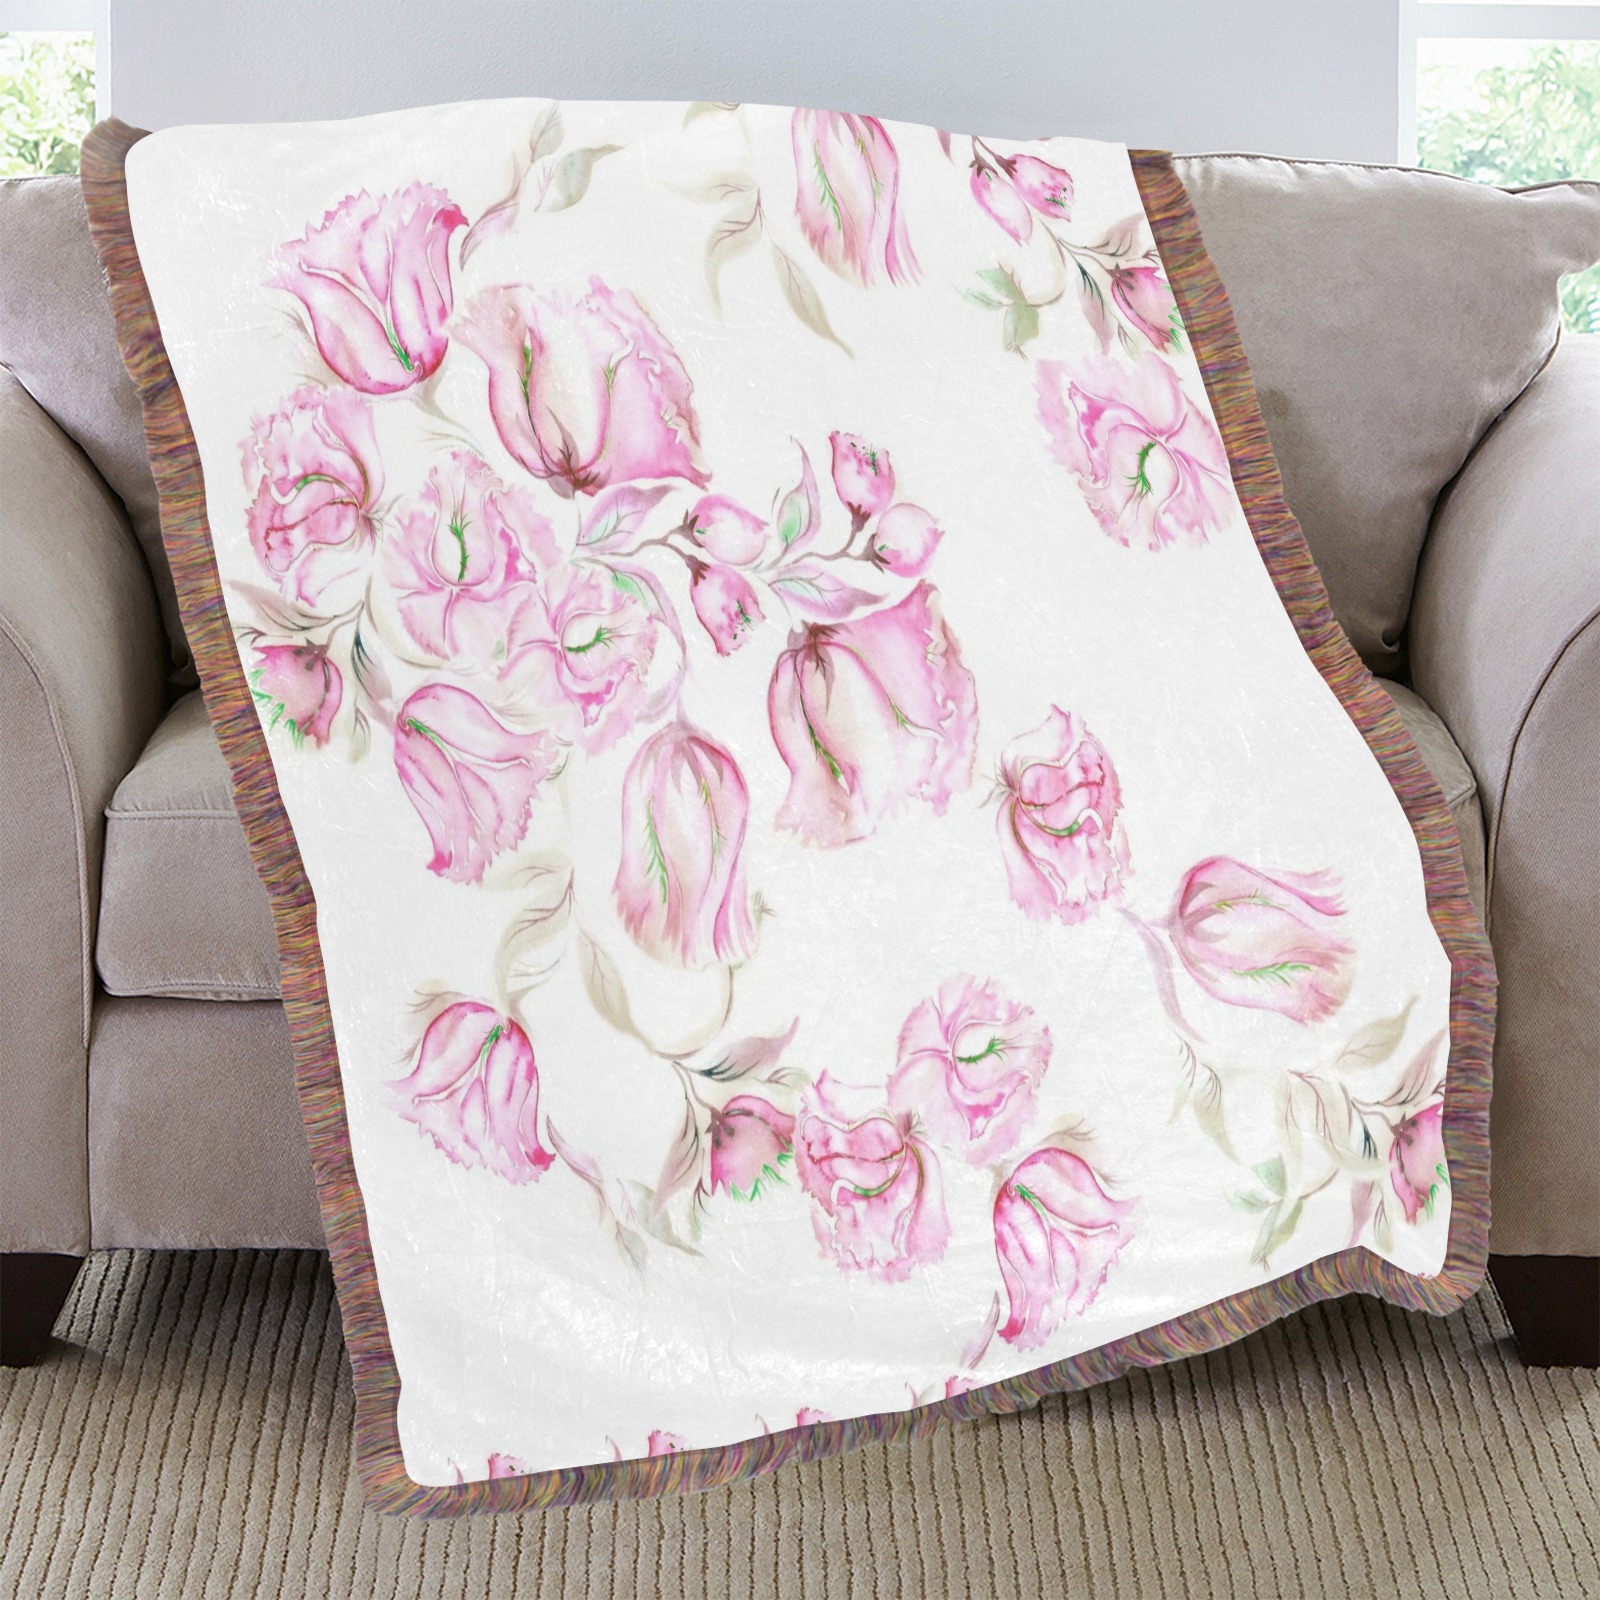 Chinese Peonies 3 Ultra-Soft Fringe Blanket 40"x50" (Mixed Green)